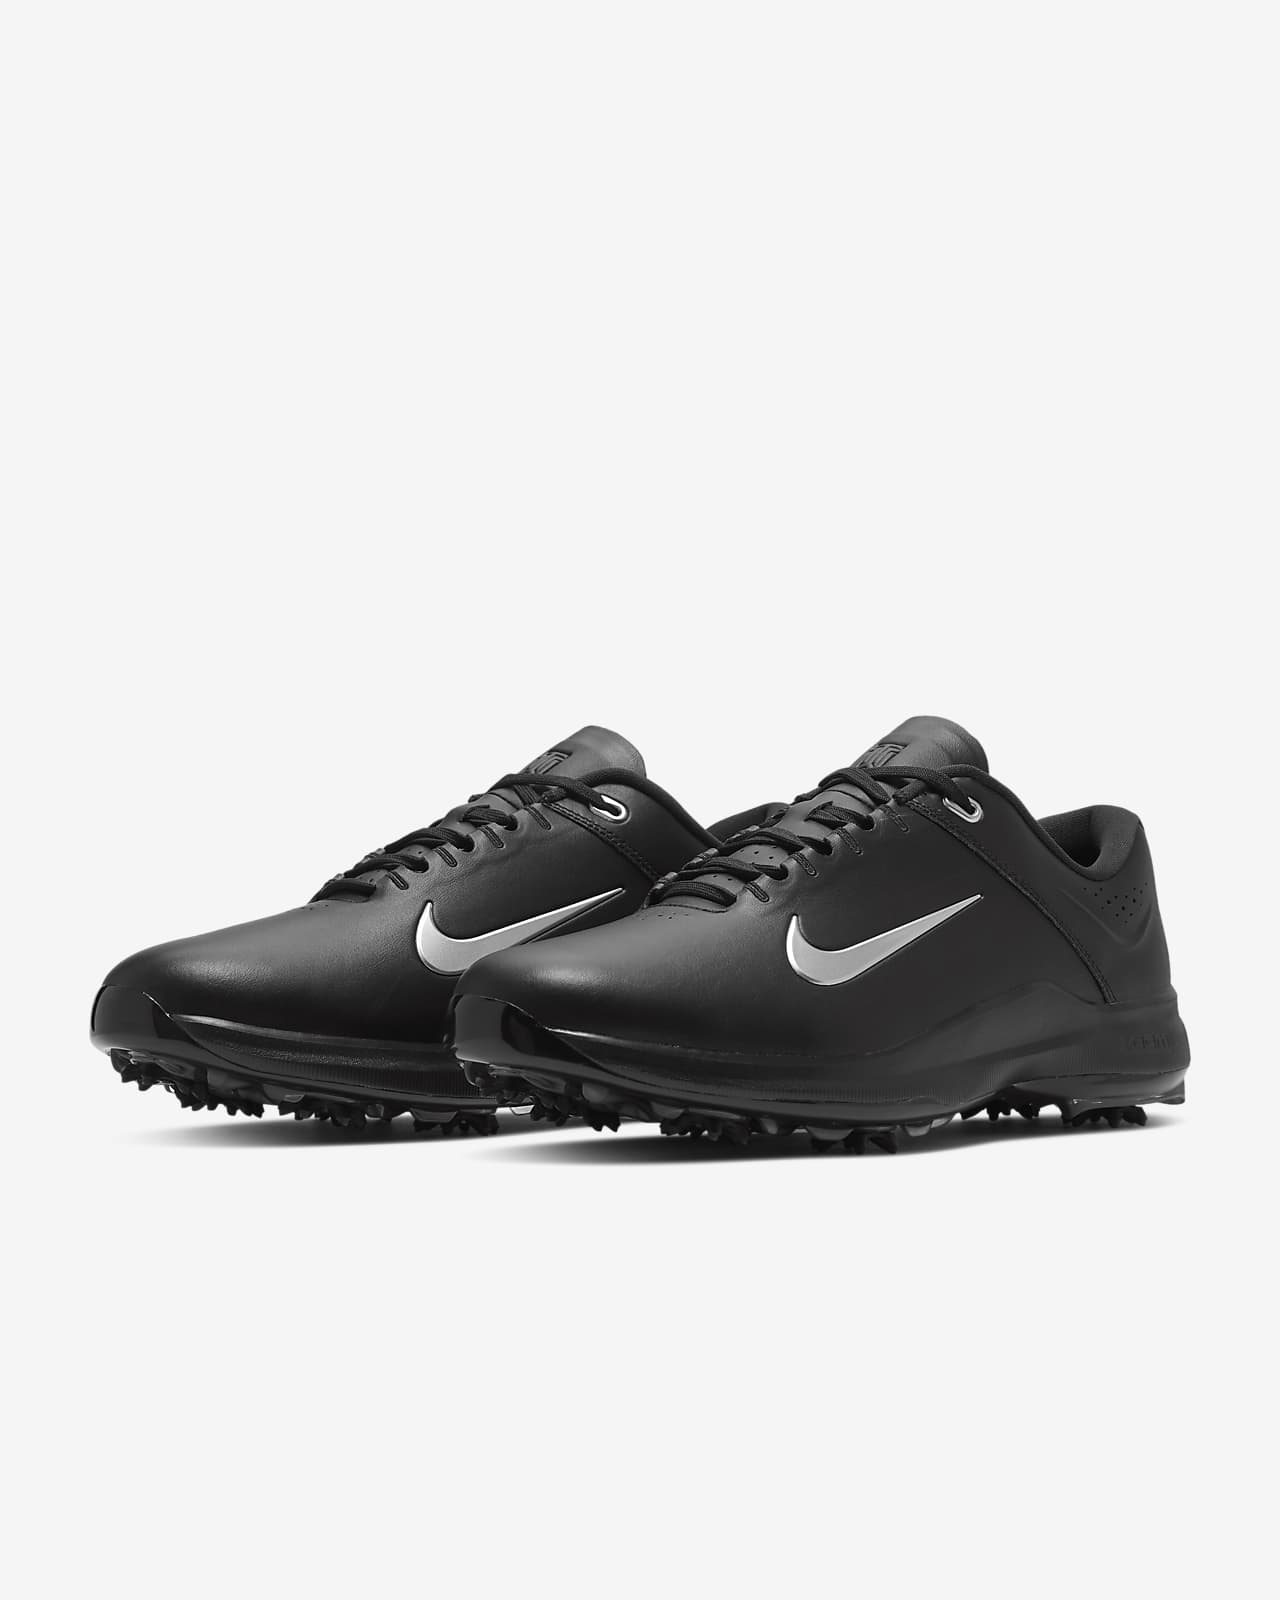 where to buy nike golf shoes